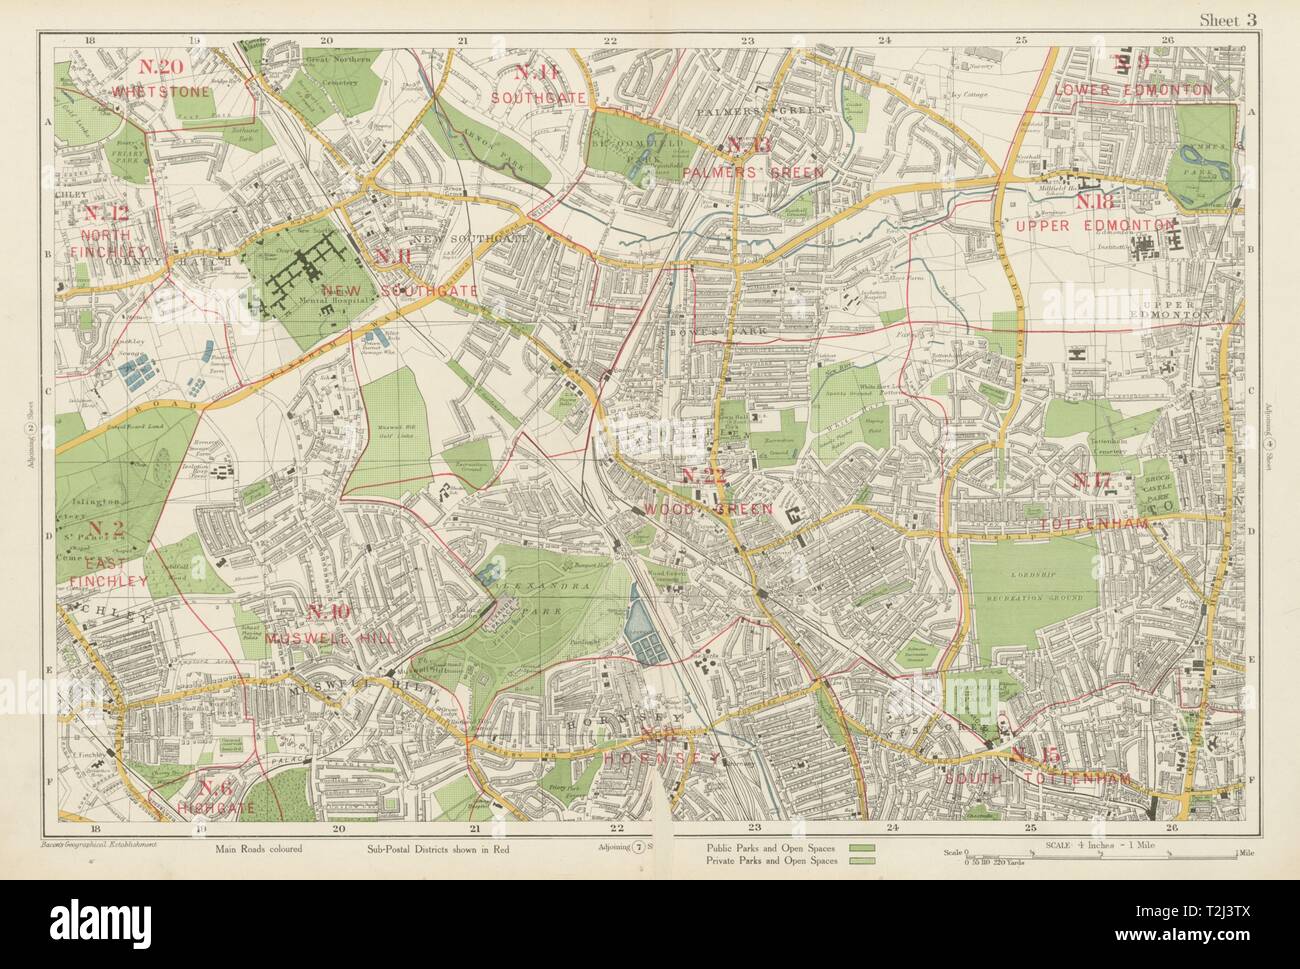 N LONDON Hornsey Edmonton Muswell Hill Southgate Tottenham. BACON 1934 old map Stock Photo